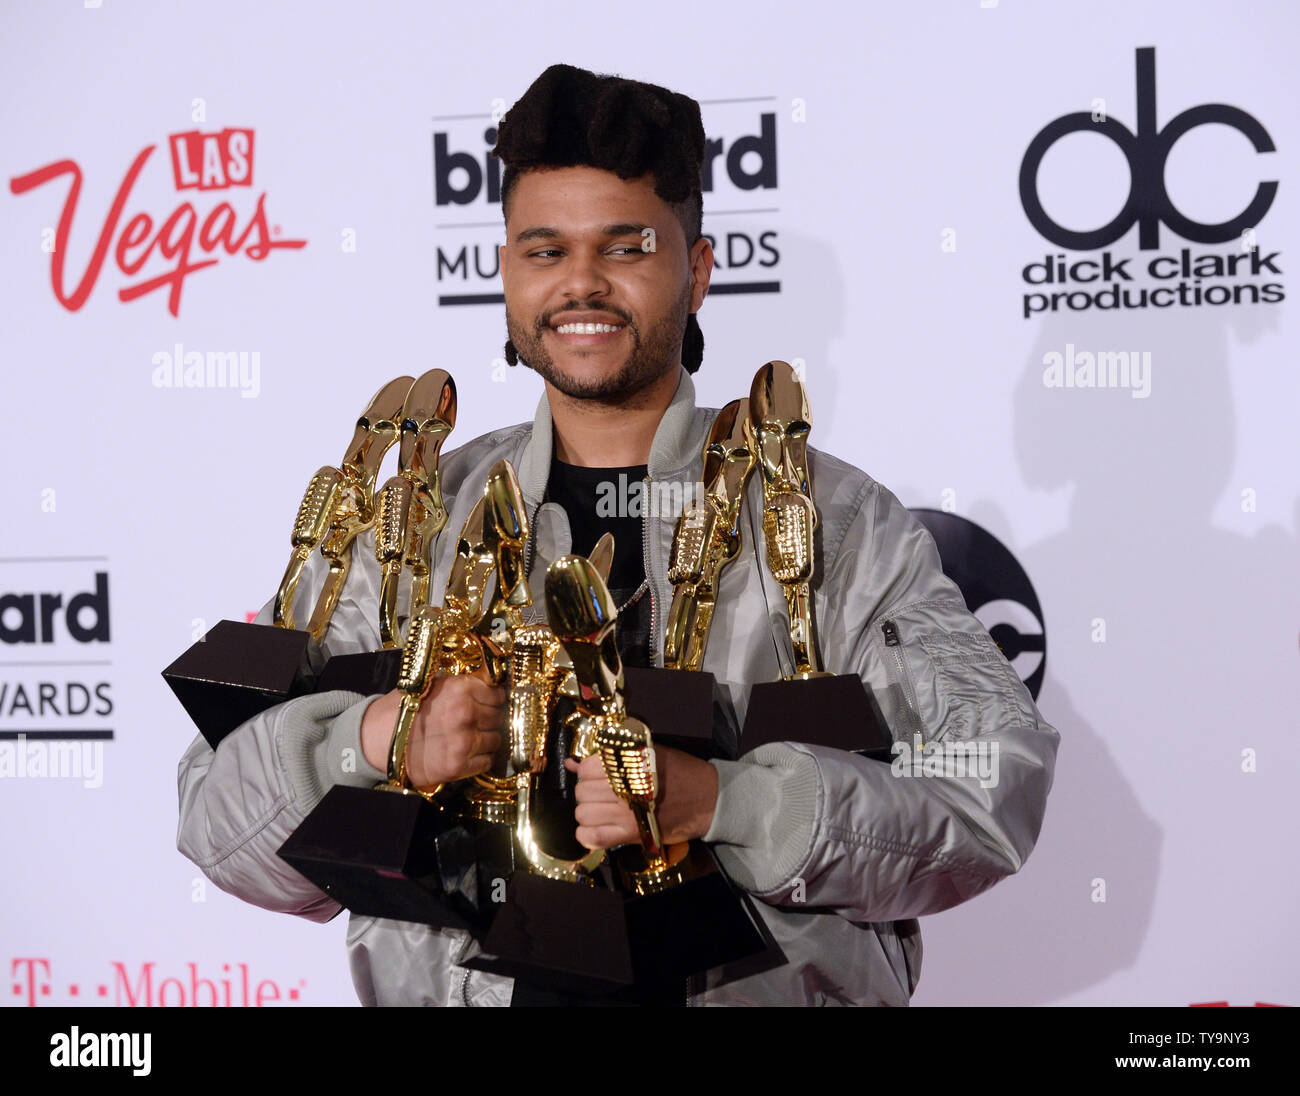 The Weeknd appears backstage with his eight awards during the annual  Billboard Music Awards held at T-Mobile Arena in Las Vegas on May 22, 2016.  The musician was honored as Top Hot